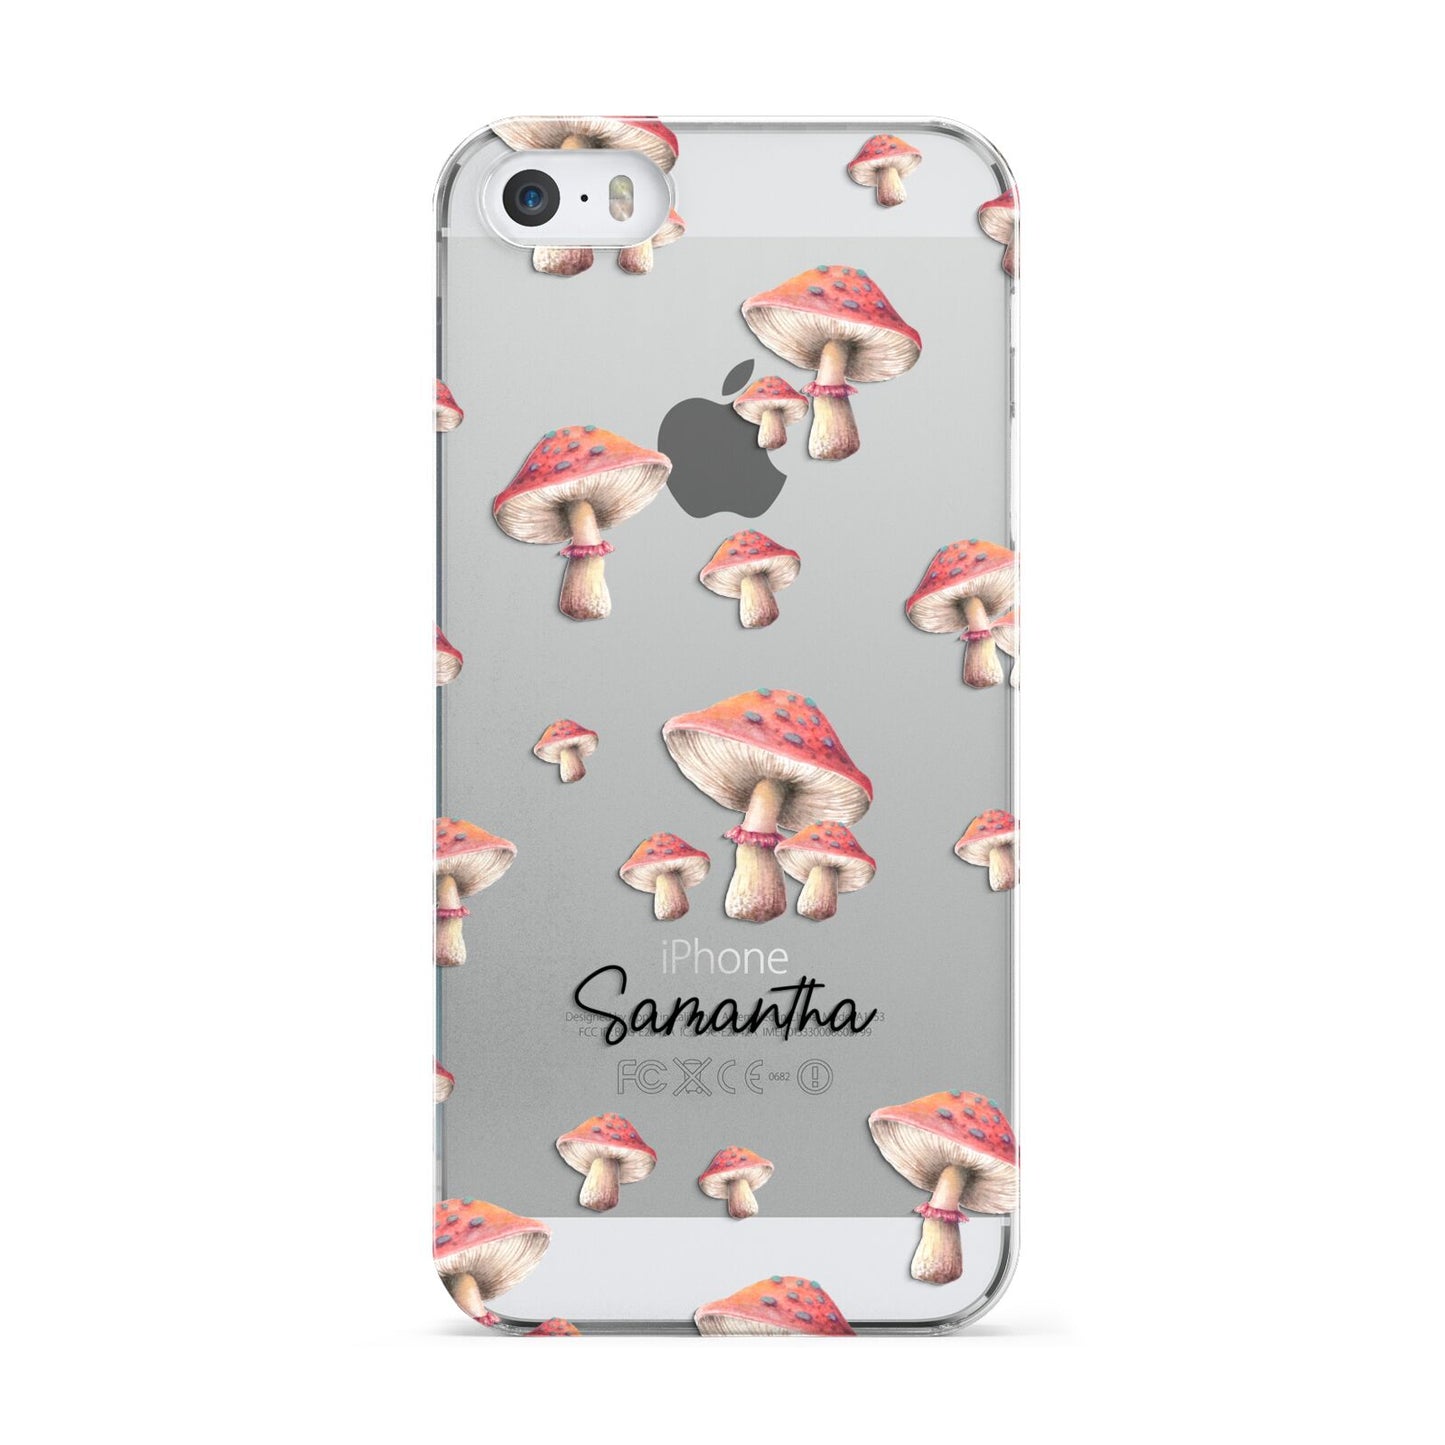 Mushroom Illustrations with Name Apple iPhone 5 Case